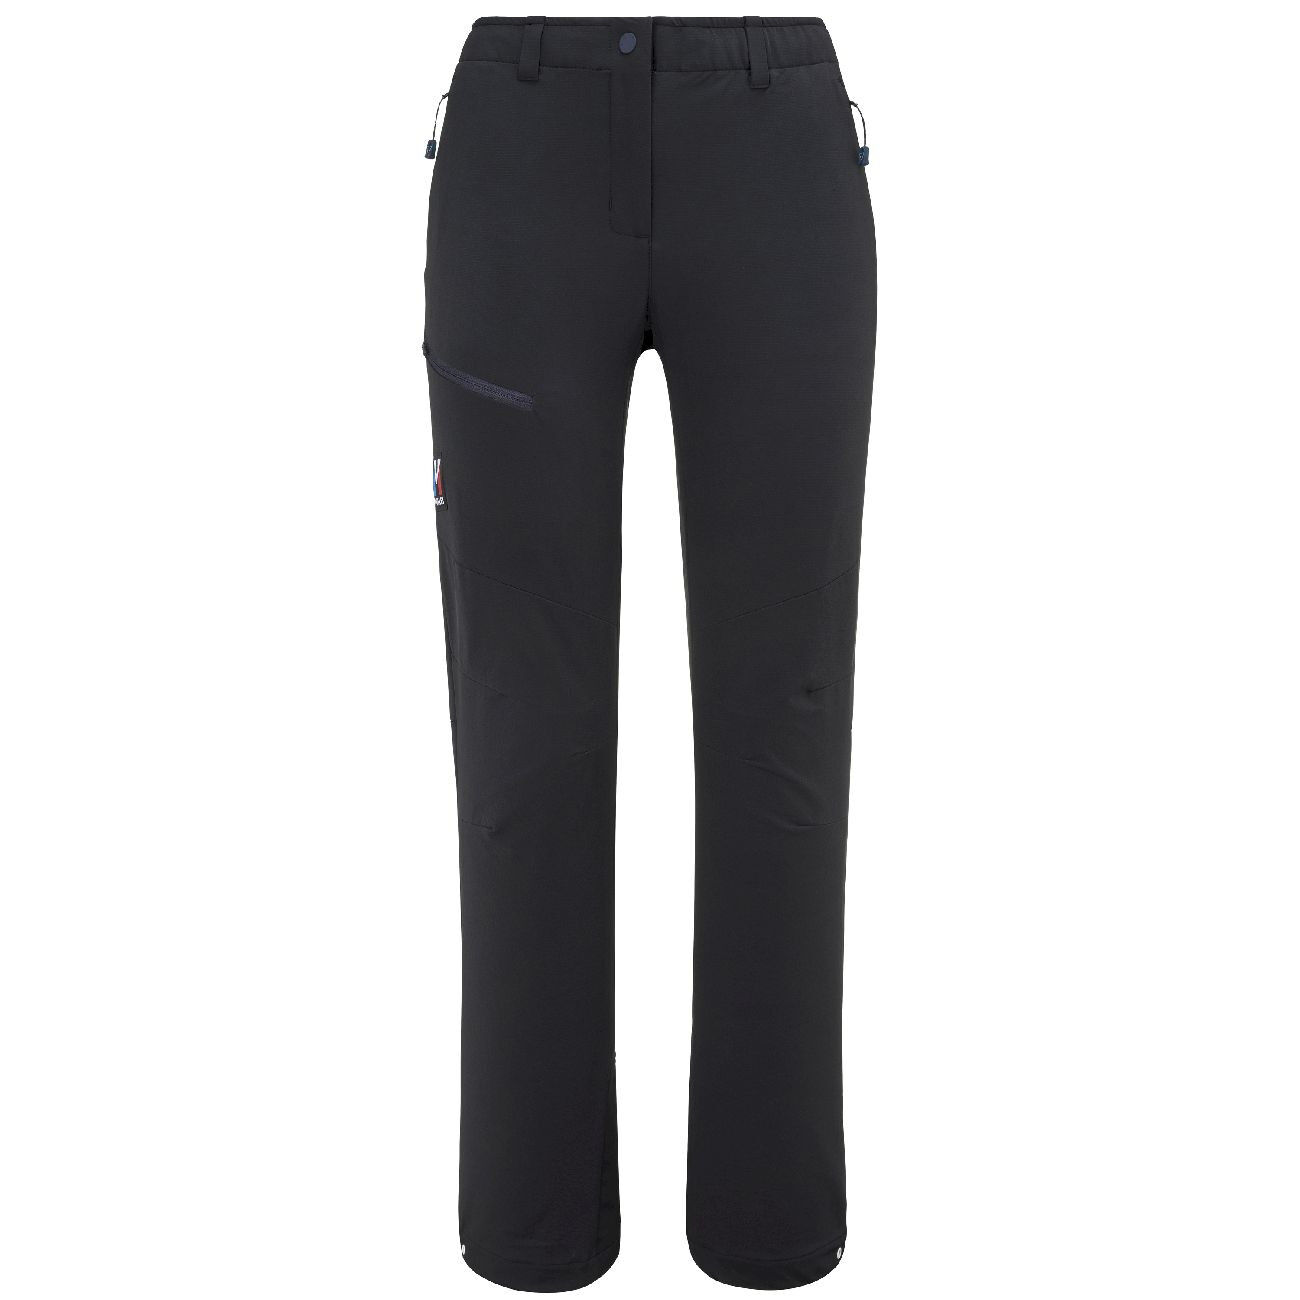 Millet Trilogy XCS Air Pant - Mountaineering trousers - Women's